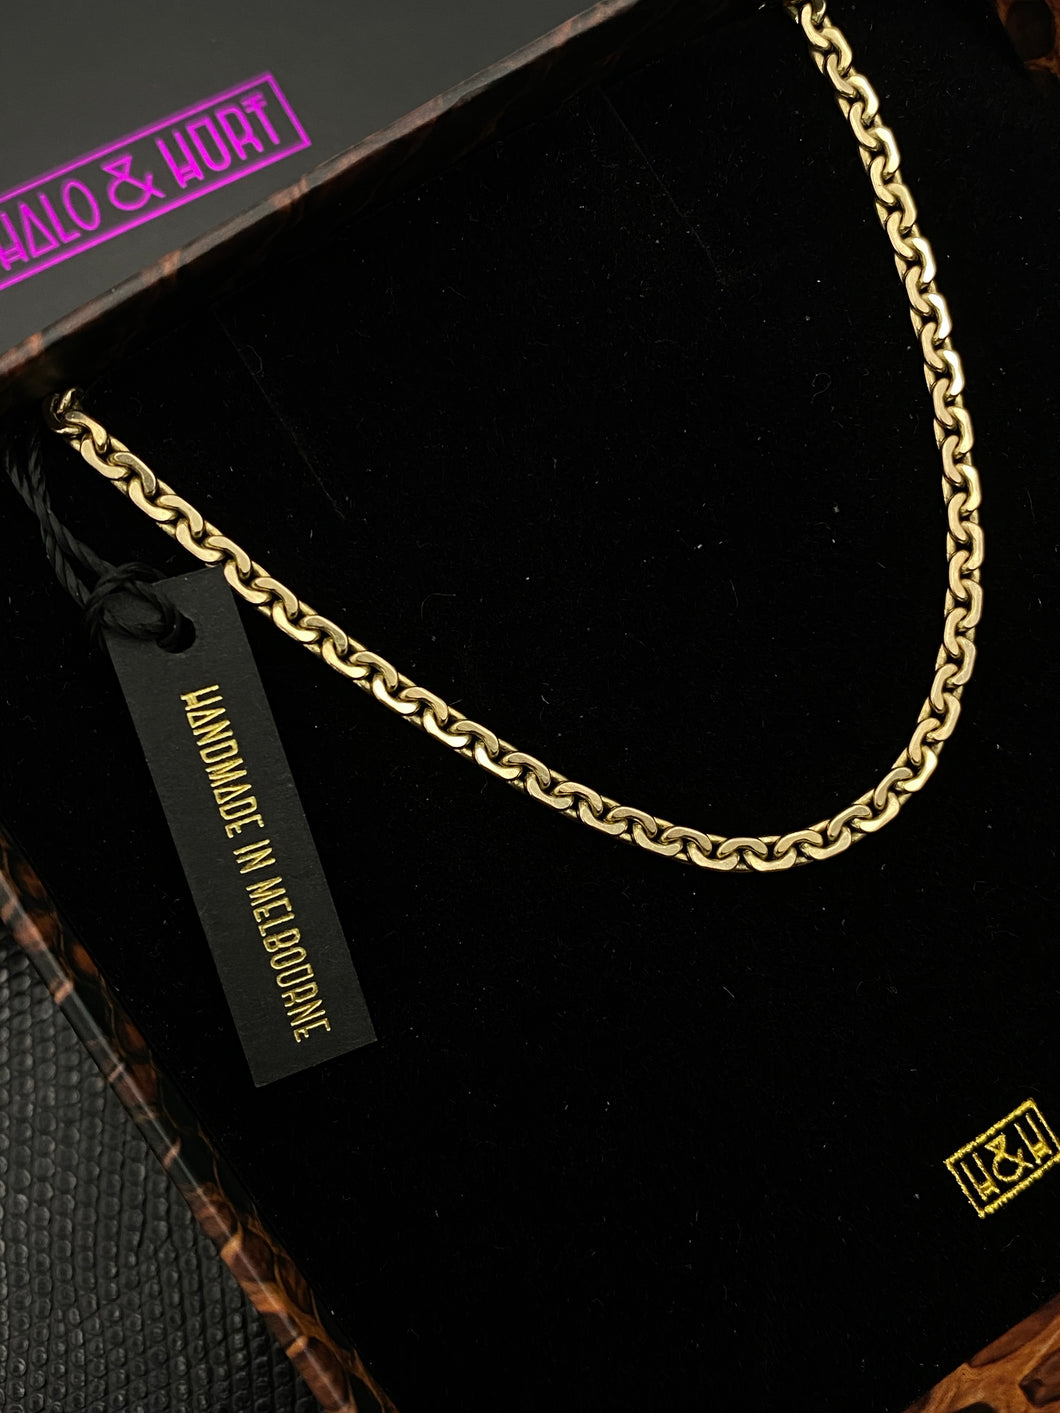 9ct Solid Gold Nautical Chain